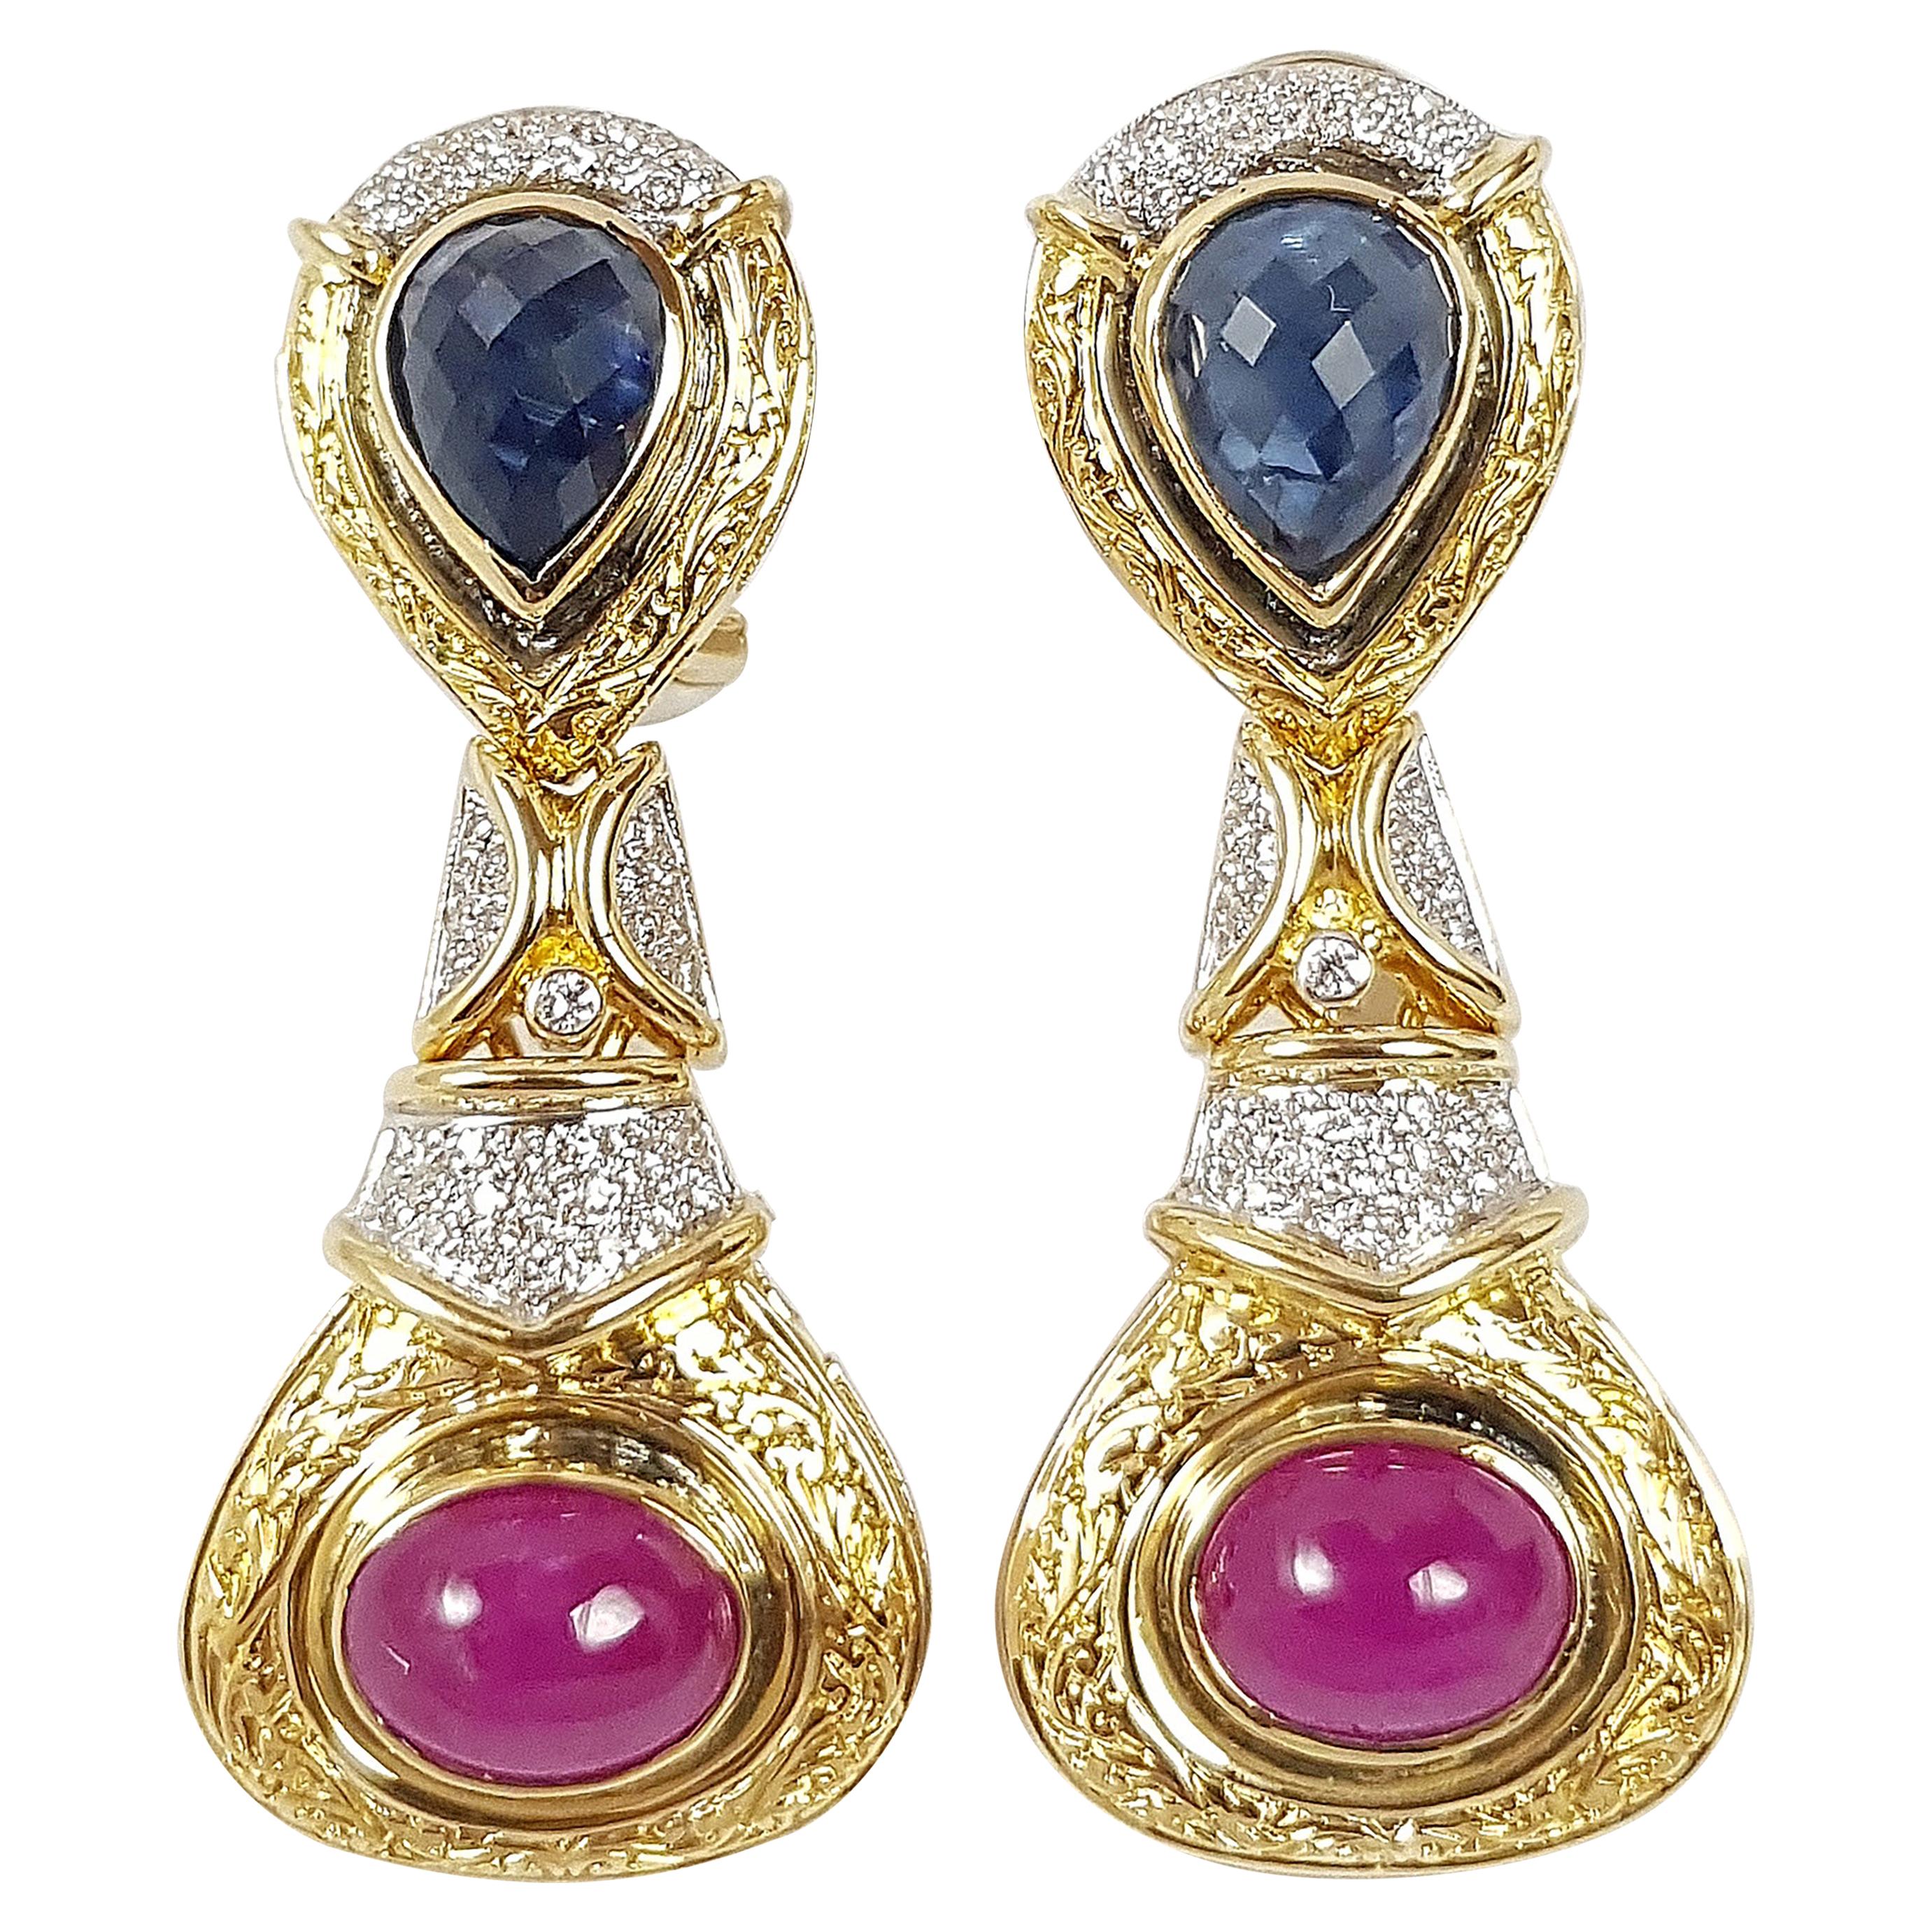 Cabochon Blue Sapphire, Cabochon Ruby with Diamond Earrings Set in 18 Karat Gold